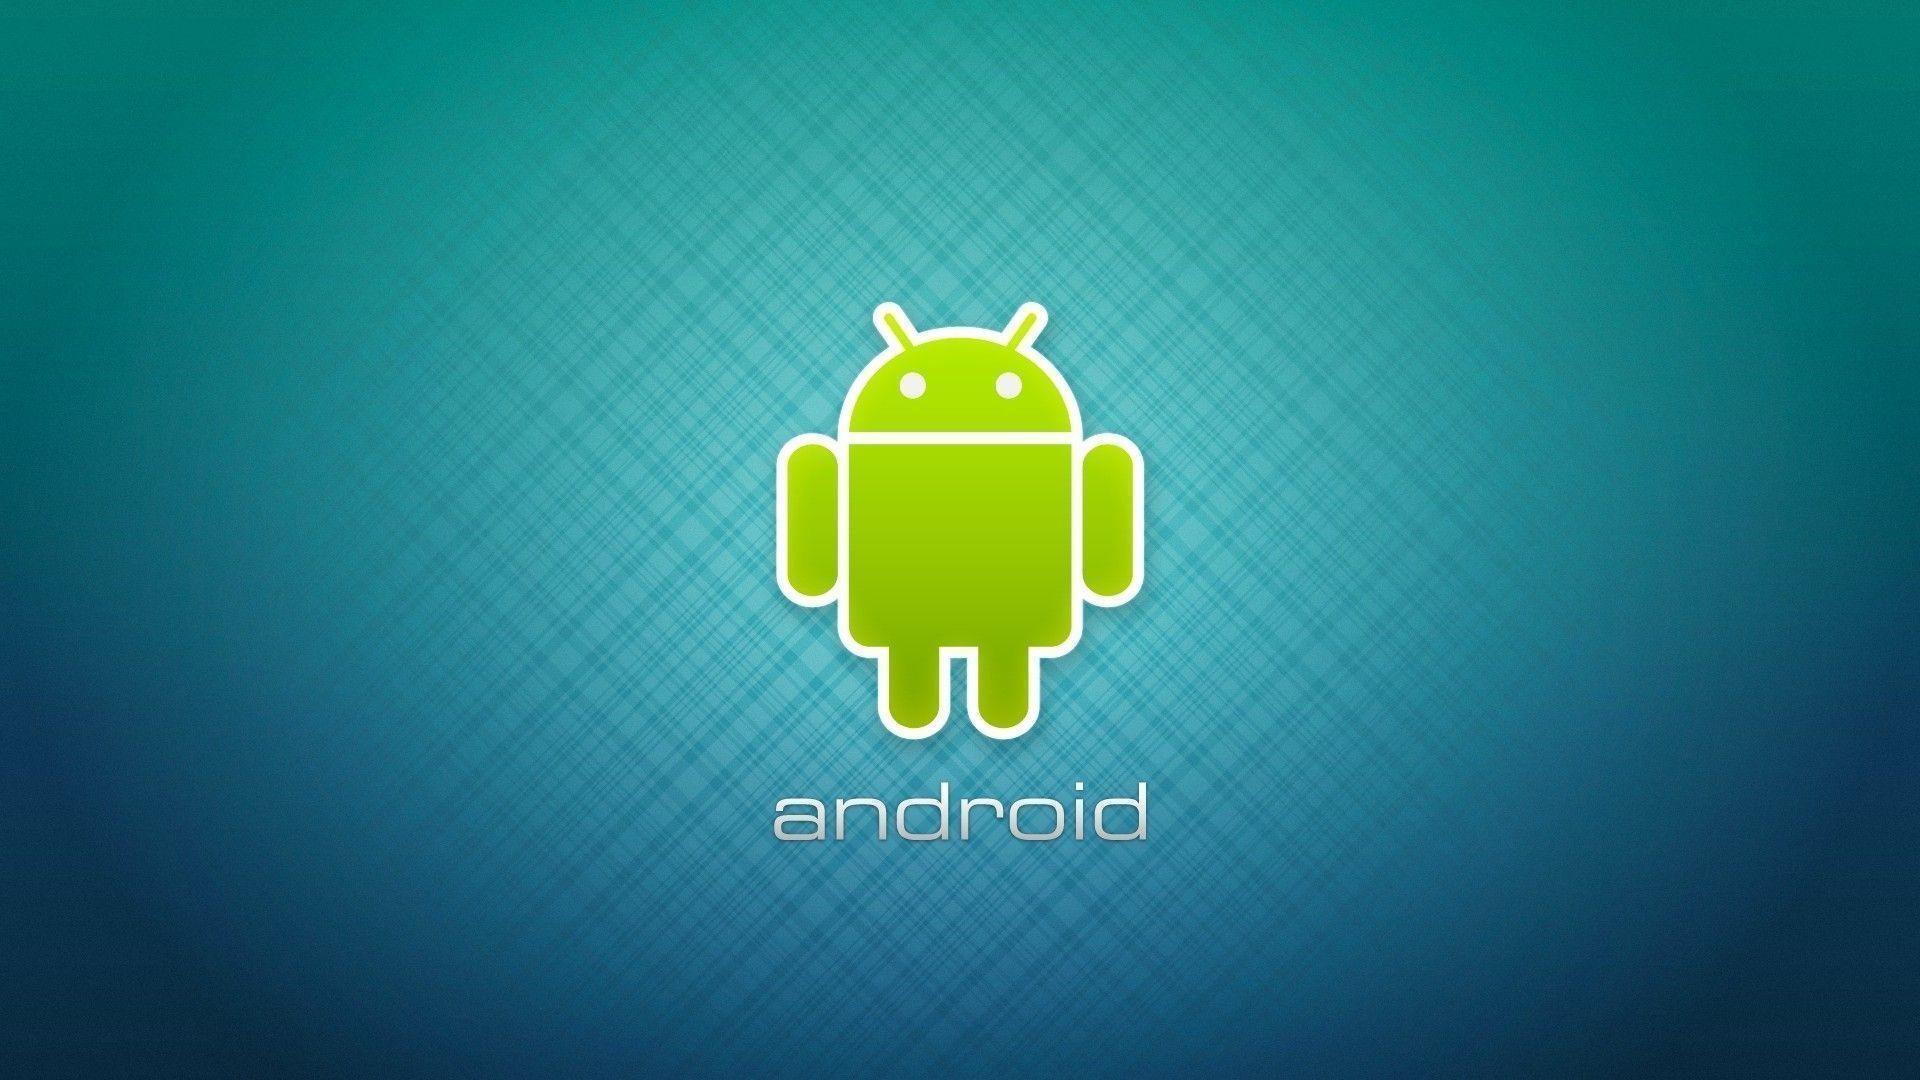 Cool Android Logo - Cool Android Logo Background Image For Desktops And Laptops | PaperPull